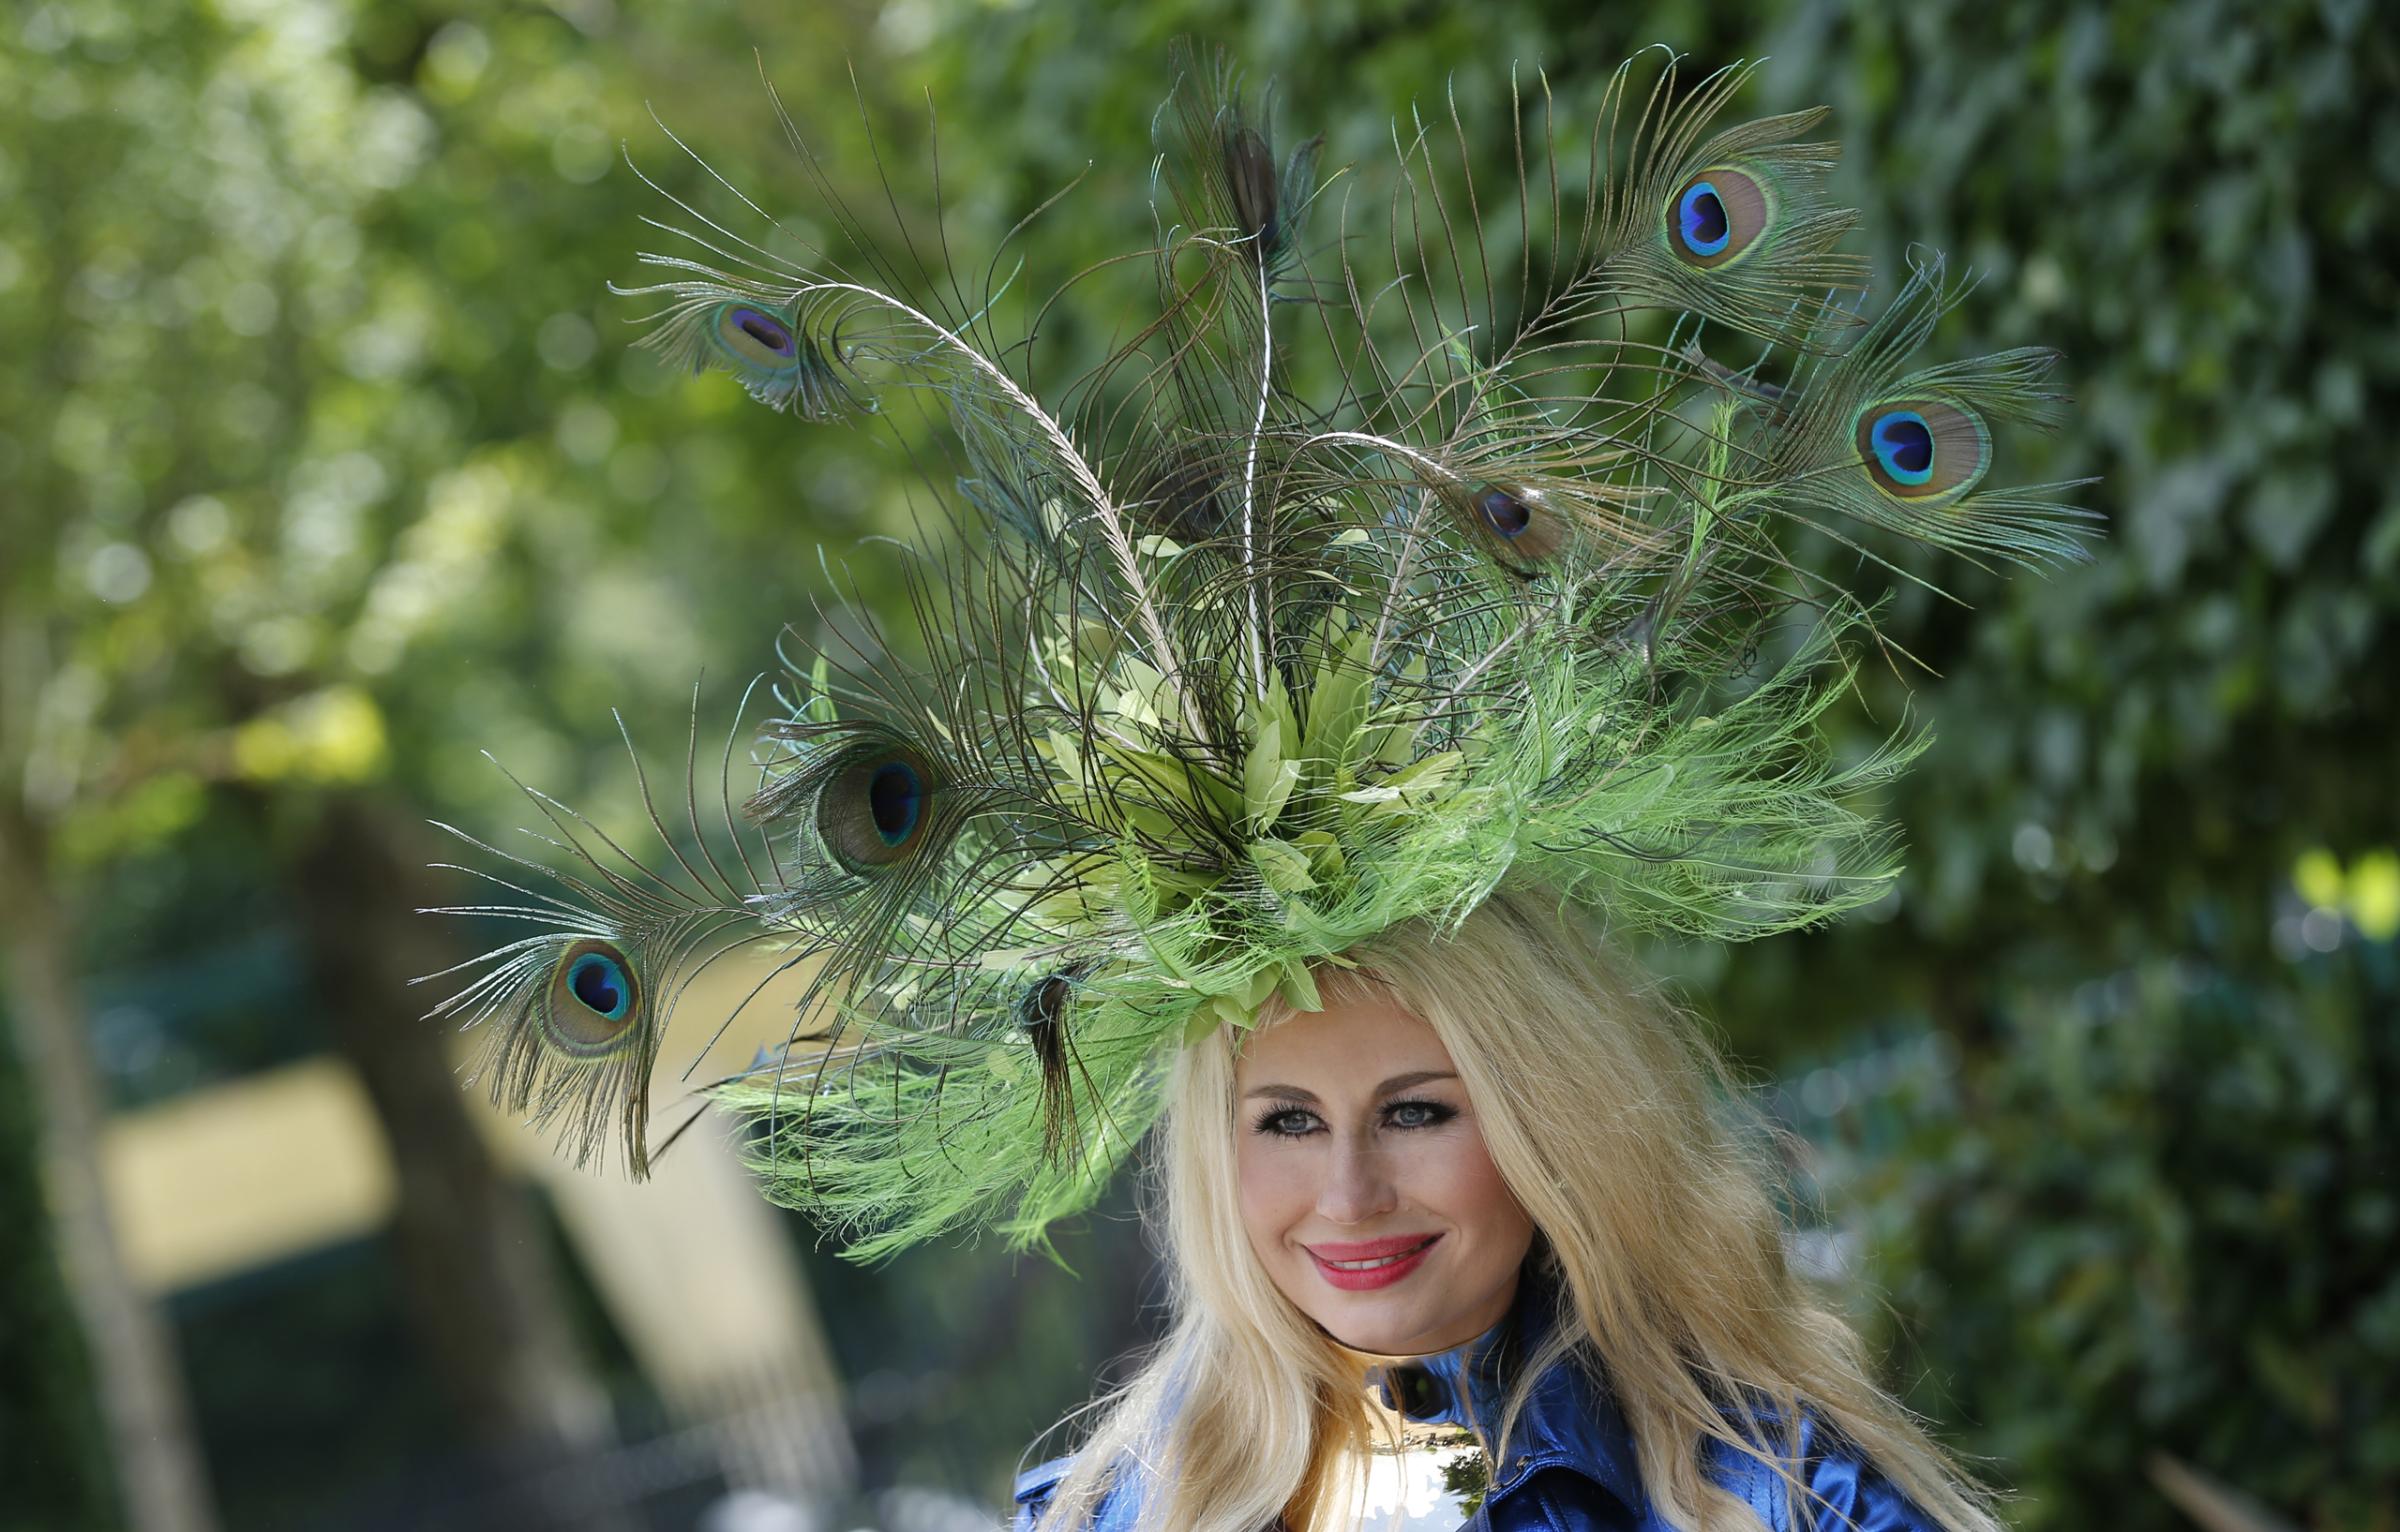 A woman wears an ornate hat made from peacock feathers on the second day of the Royal Ascot horse race meeting at Ascot, England, Wednesday, June 15, 2016. (AP Photo/Alastair Grant)